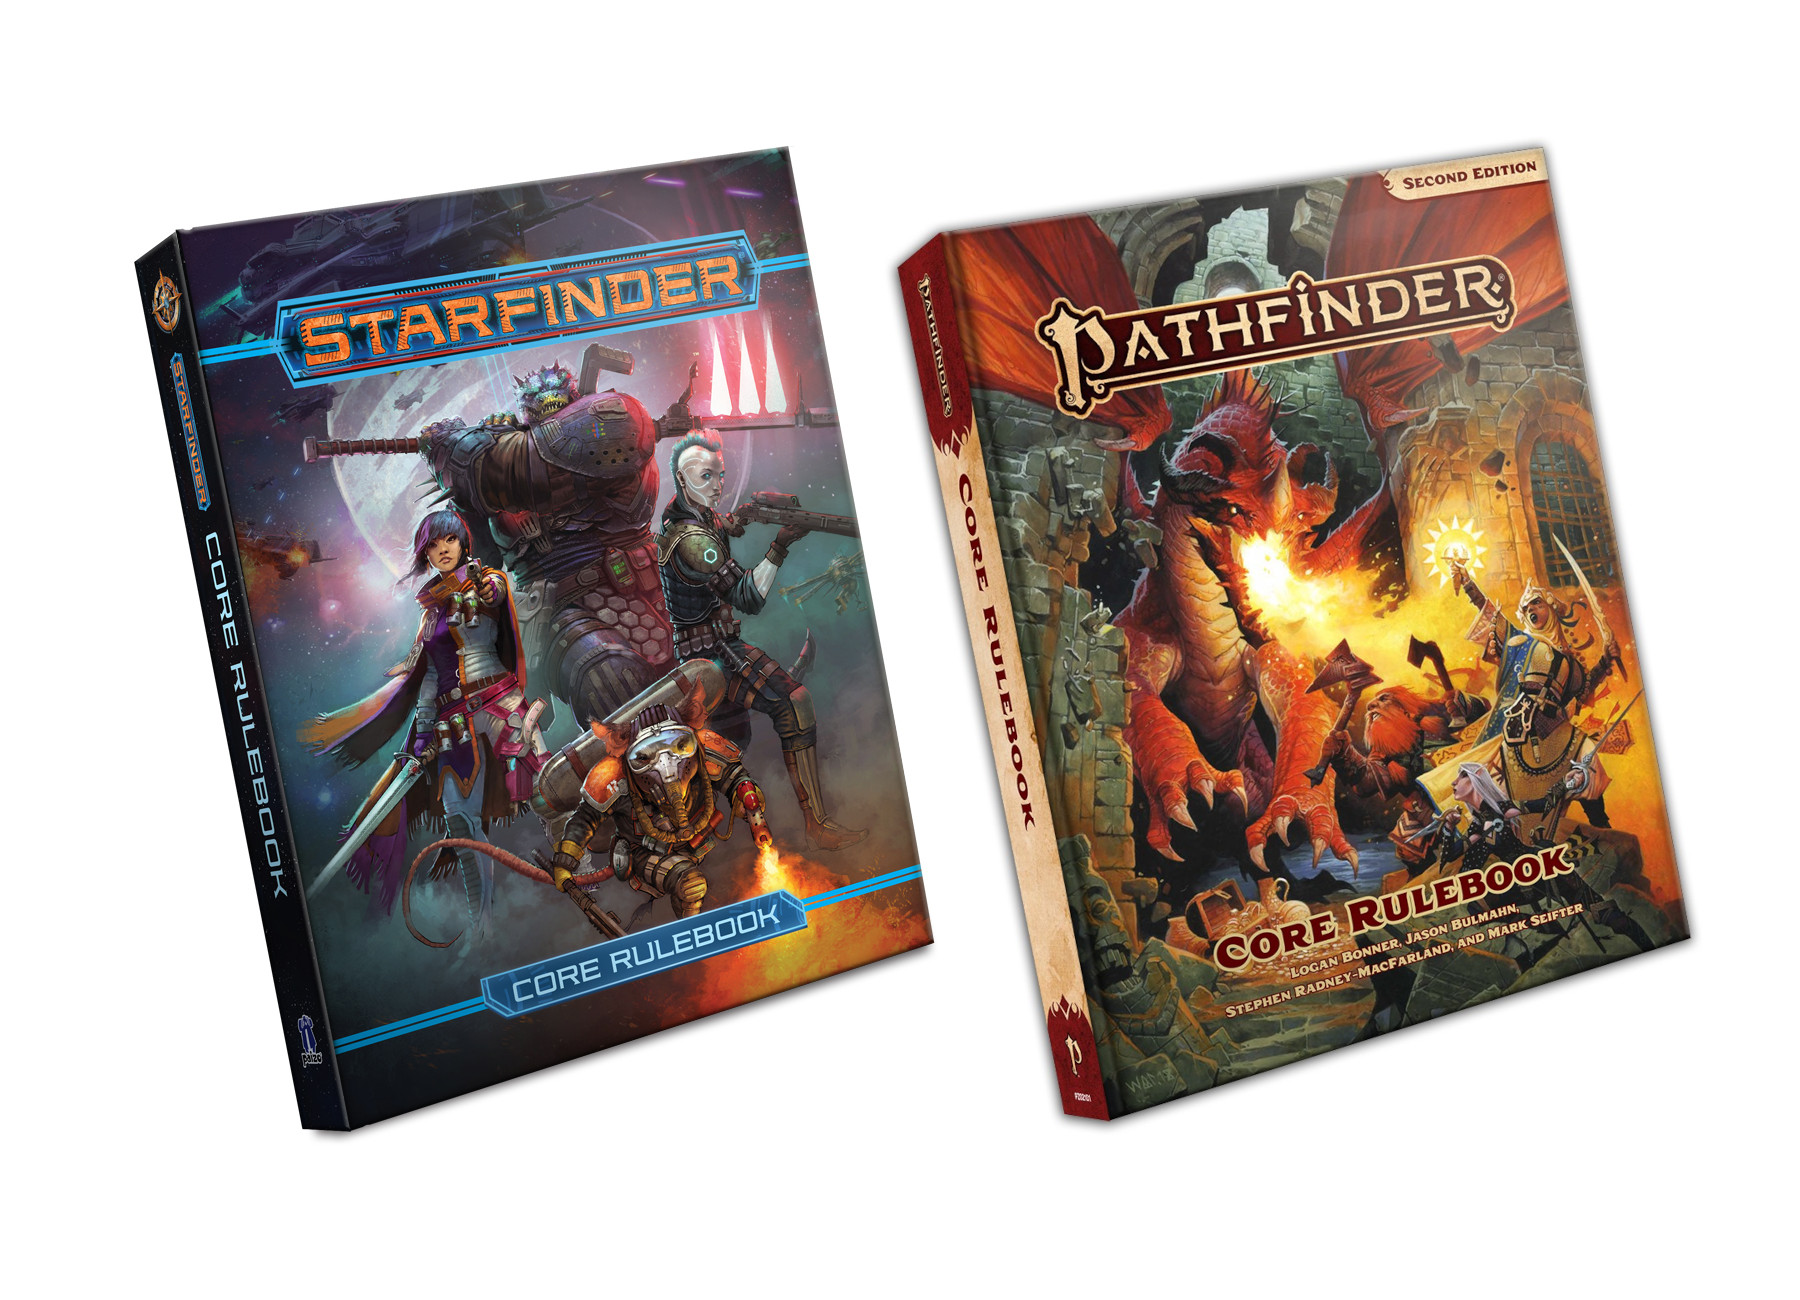 Pathfinder Second Edition Core Rulebook and Starfinder Core Rulebook Digital CD Key 12.58 usd